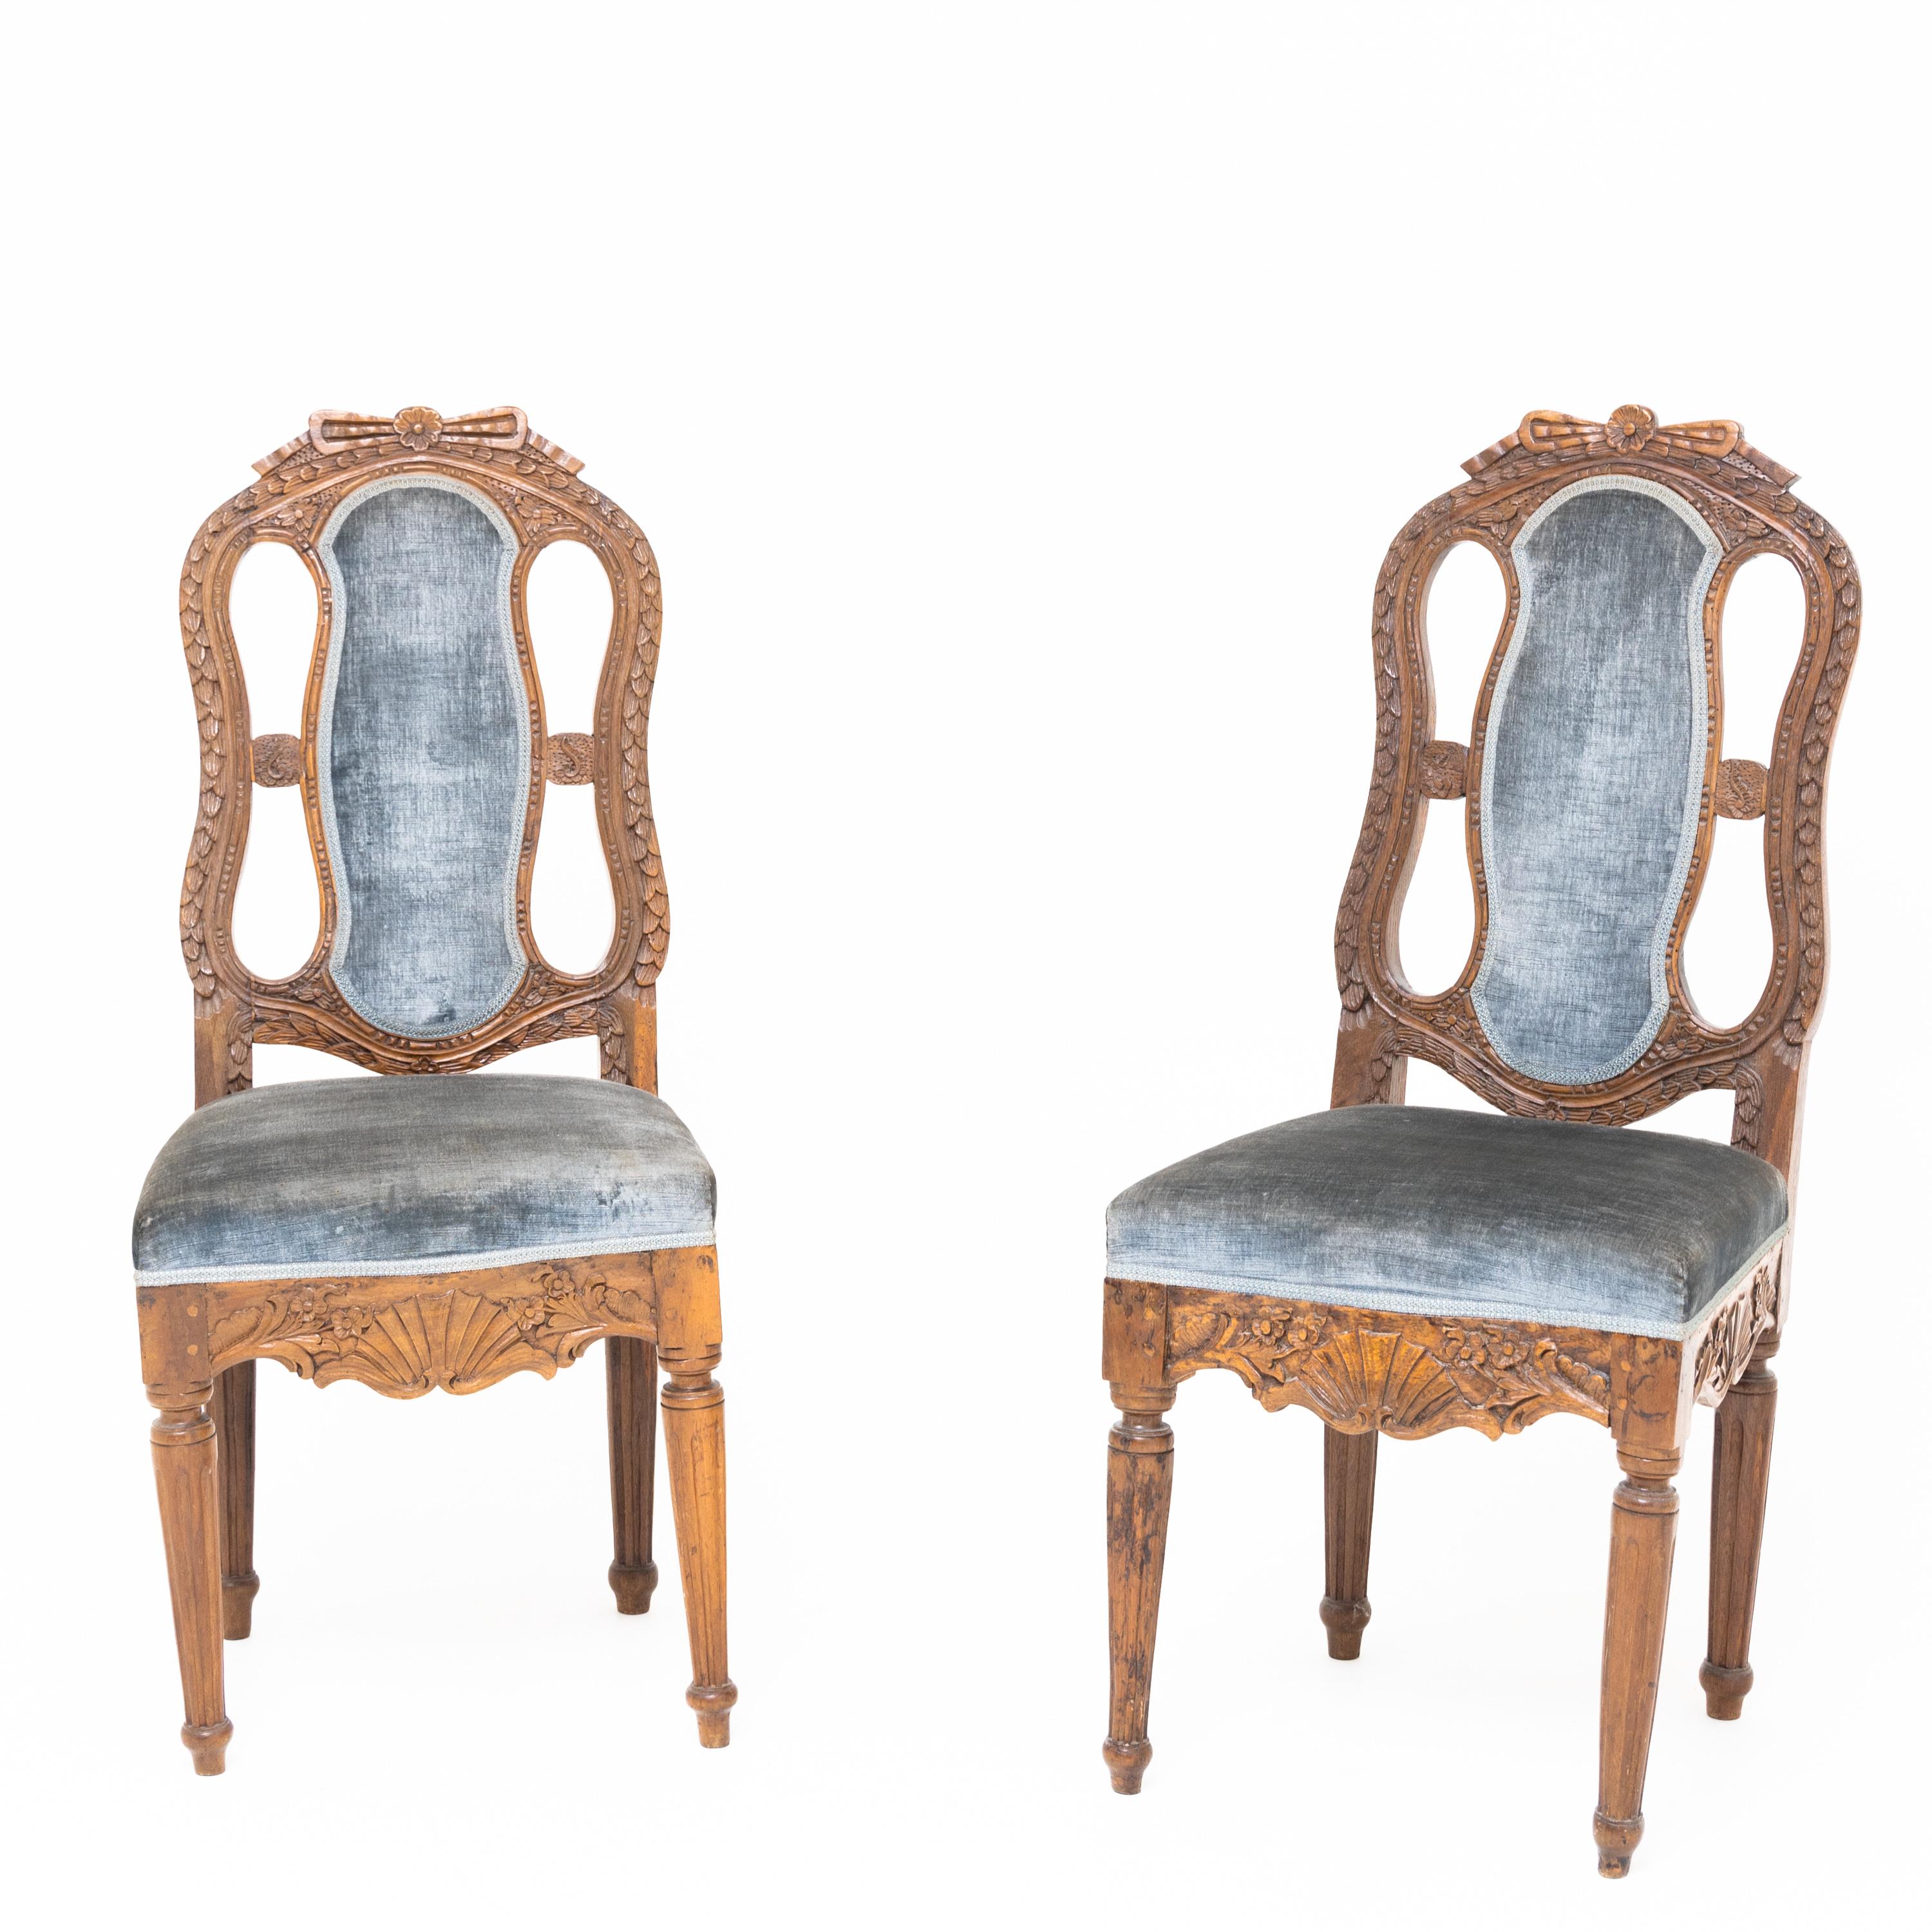 Pair of baroque chairs made of solid oak with openwork backrests with an upholstered centre bar and carved vegetable décor with shell ornament on the curved frame. The chairs are covered with blue velvet. Shown in: Eller, Möbel des Klassizismus,